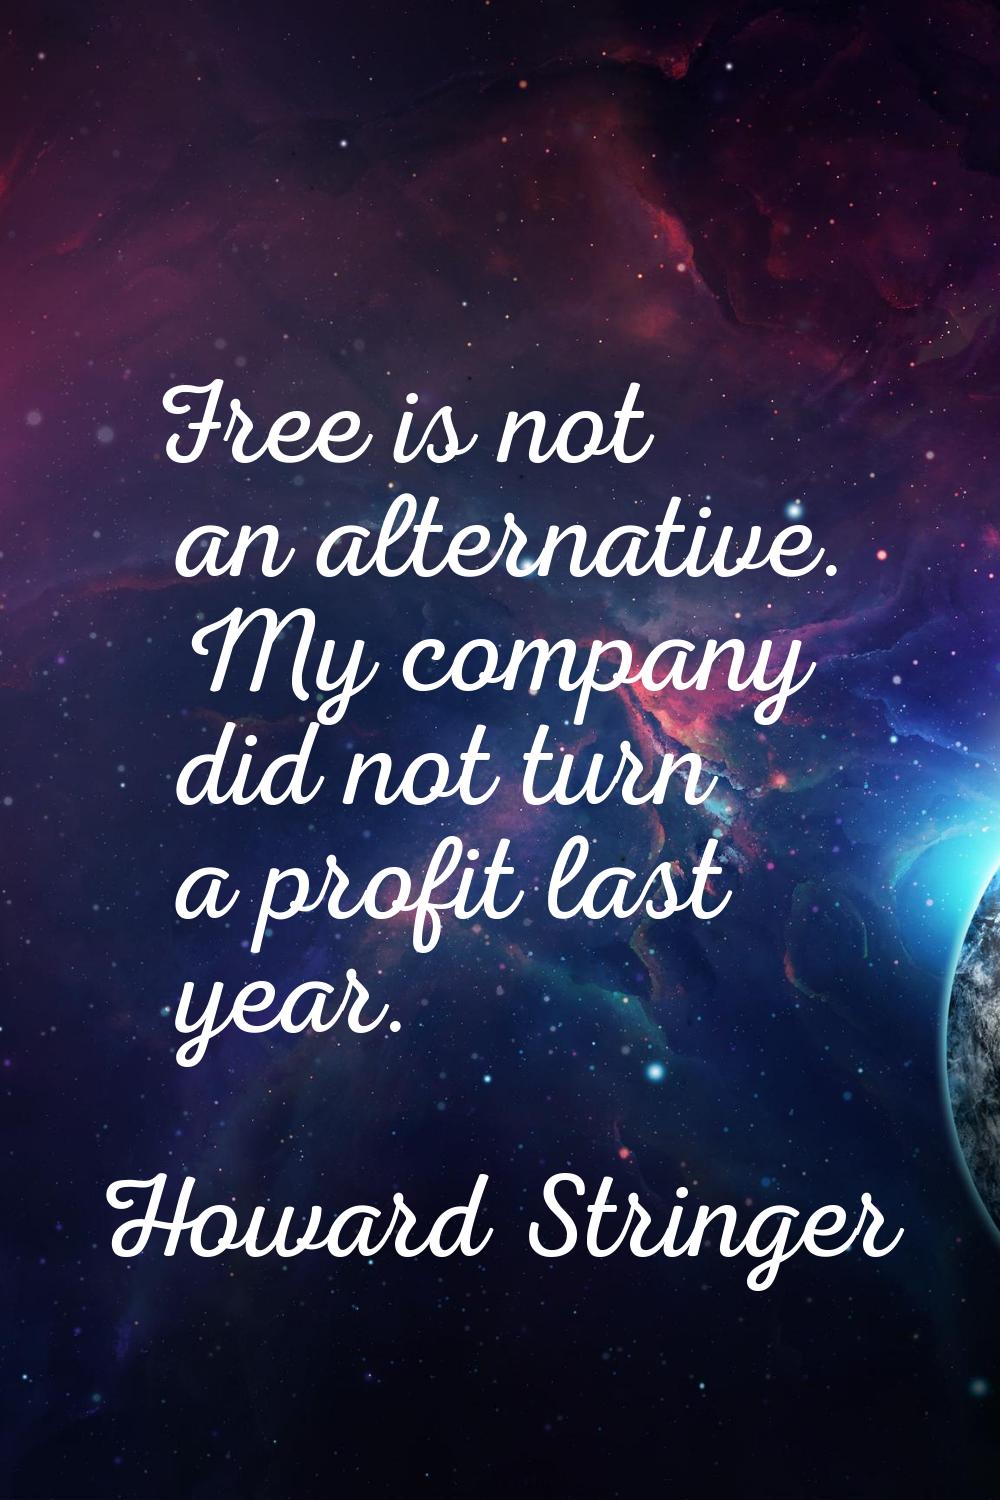 Free is not an alternative. My company did not turn a profit last year.